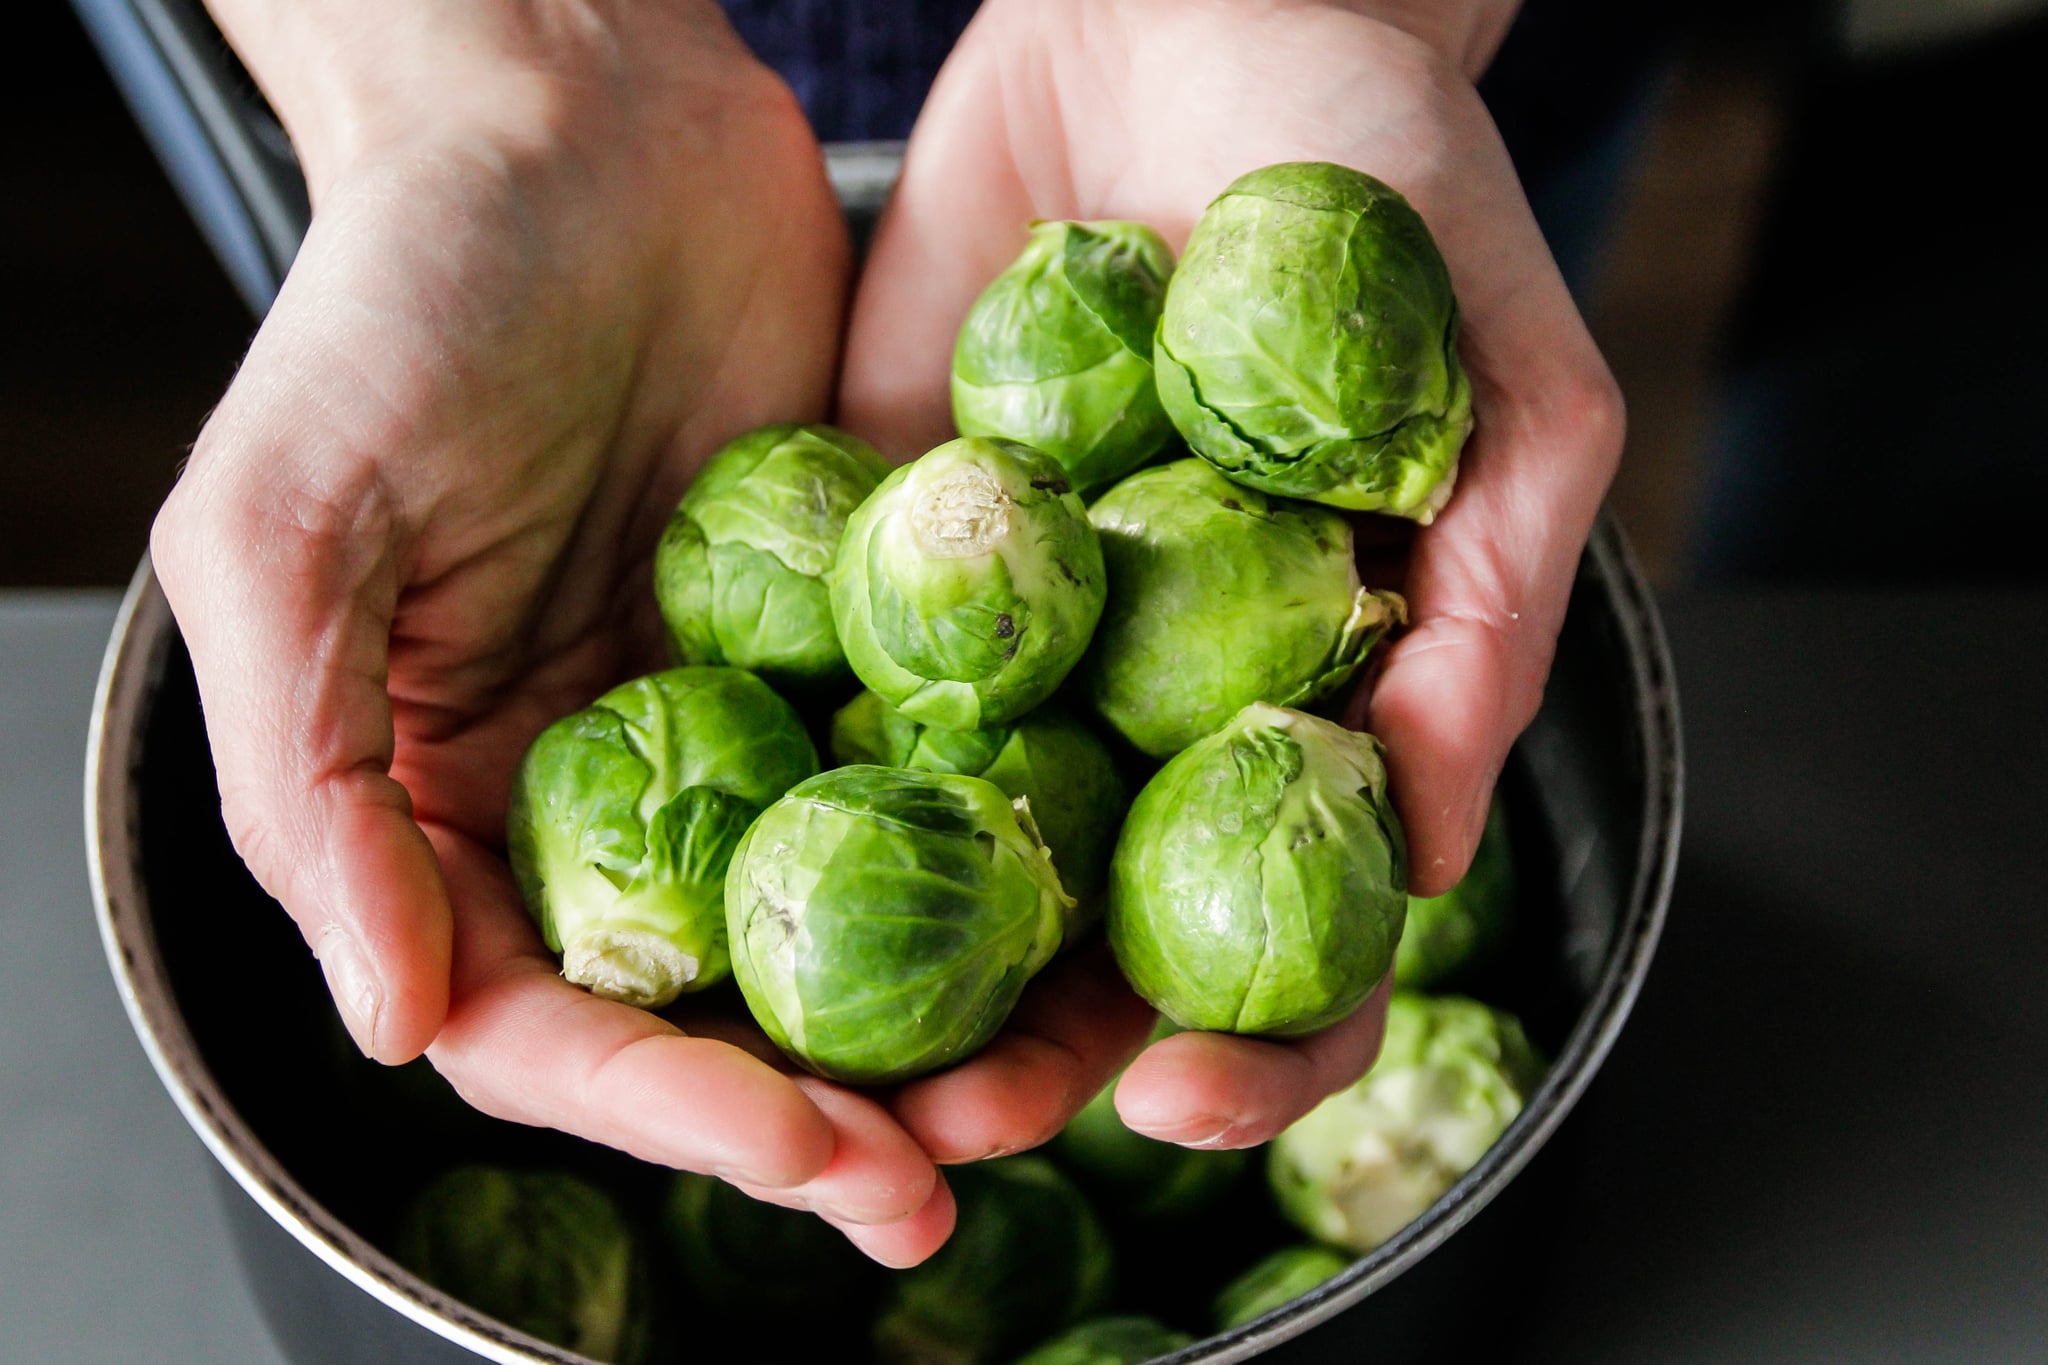 Are brussels sprouts good for you?